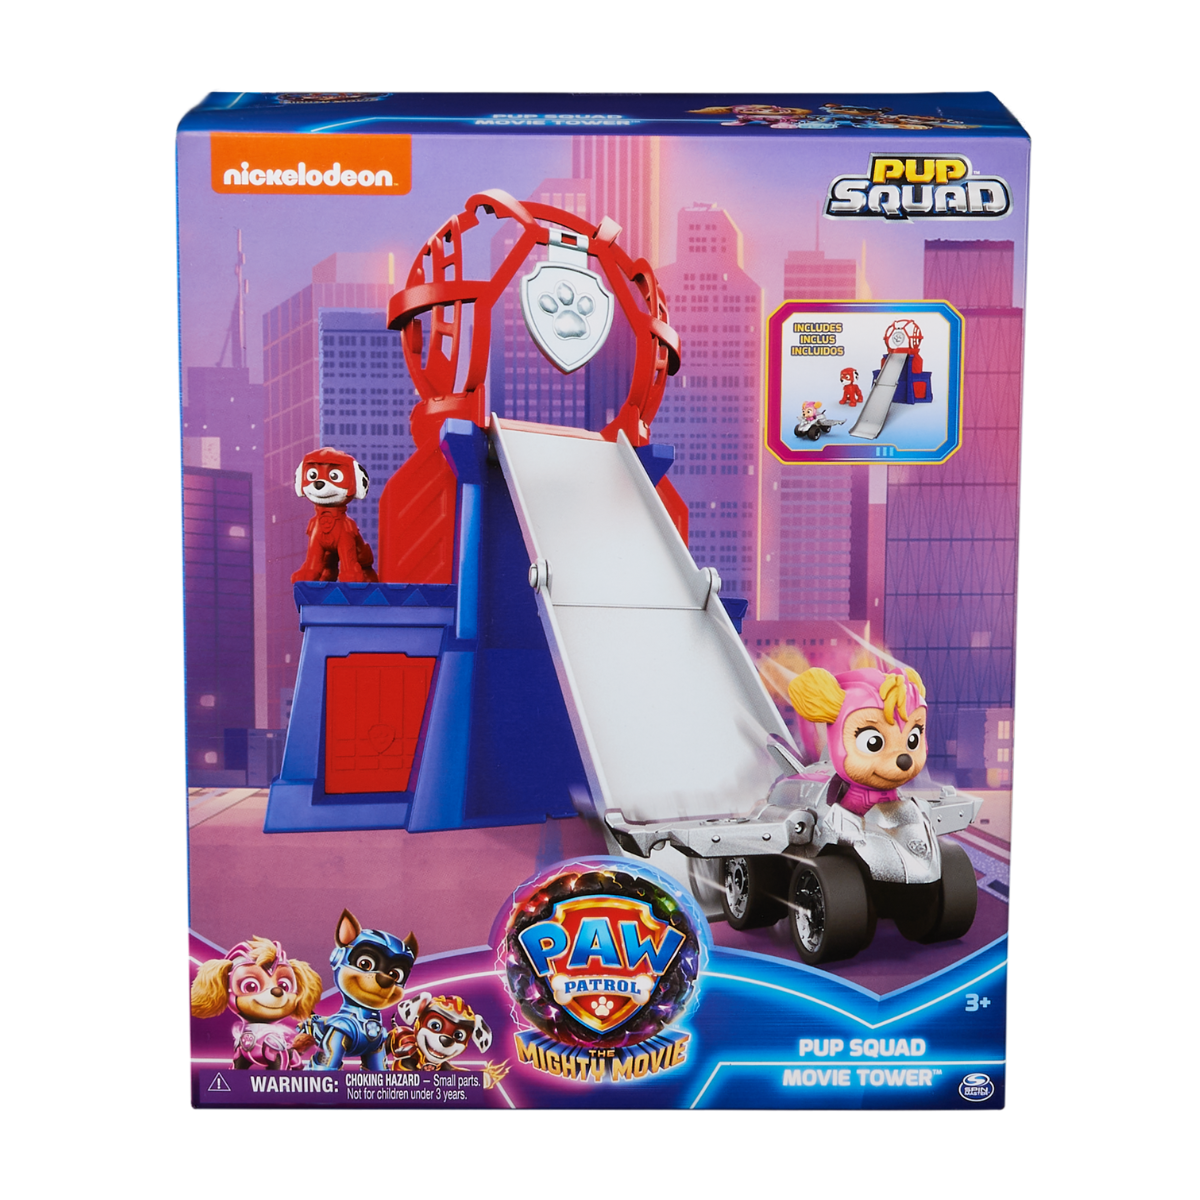 Mighty Tower Playset